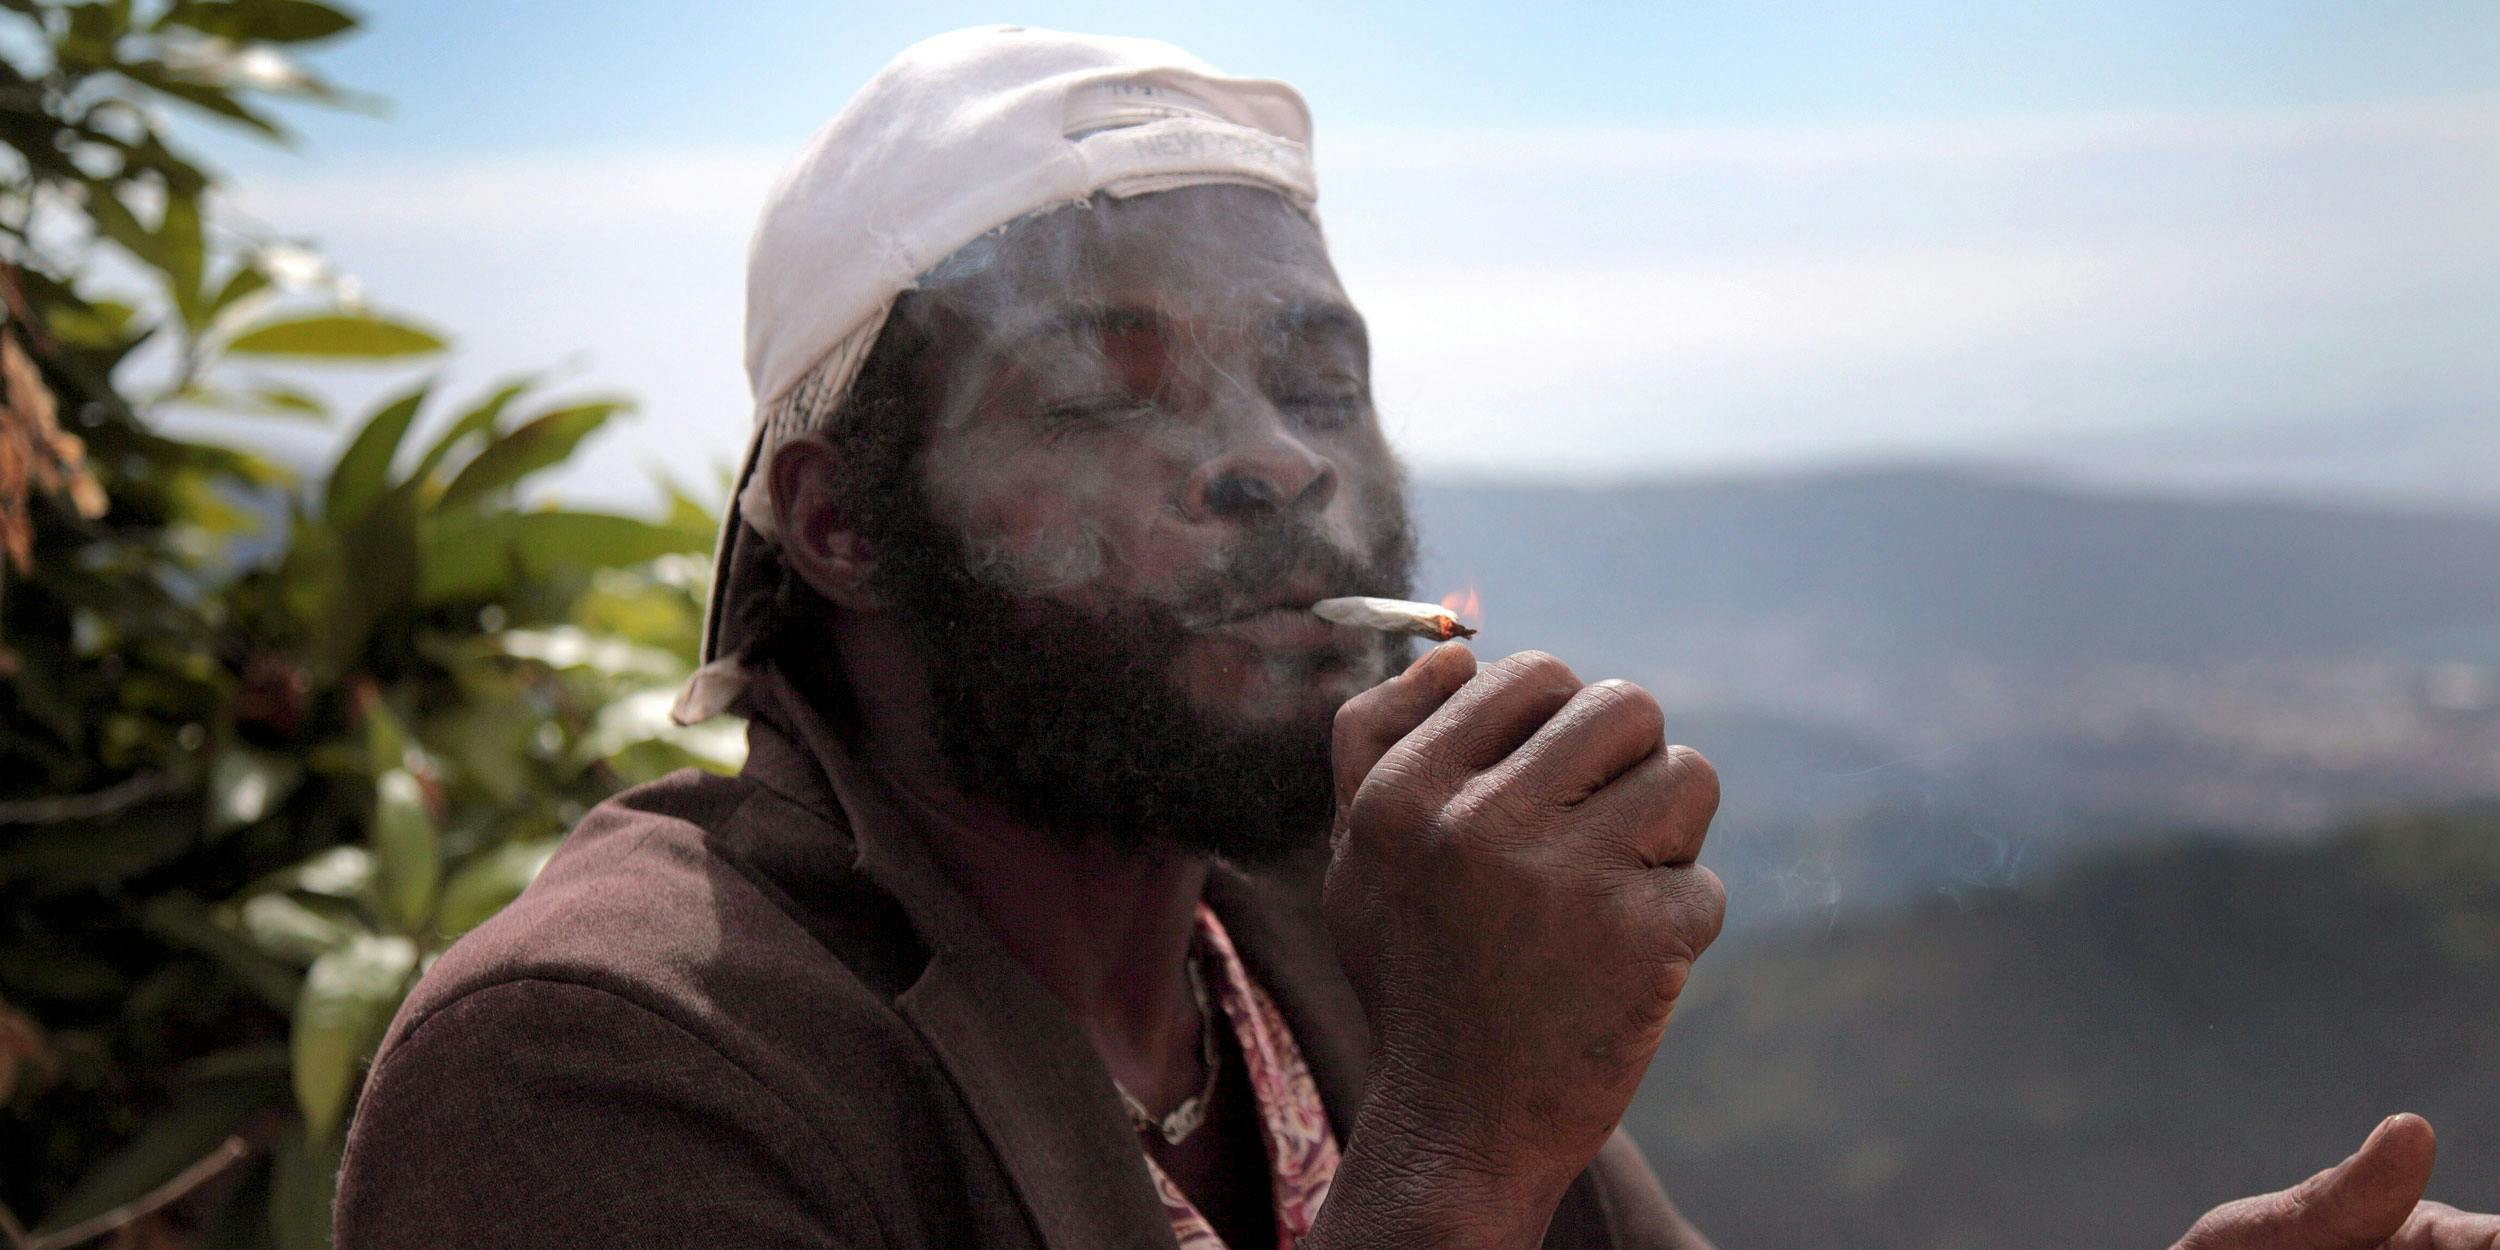 A man in Jamaica smokes weed. Jamaica is one of the five countries most likely to legalize cannabis in the near future.